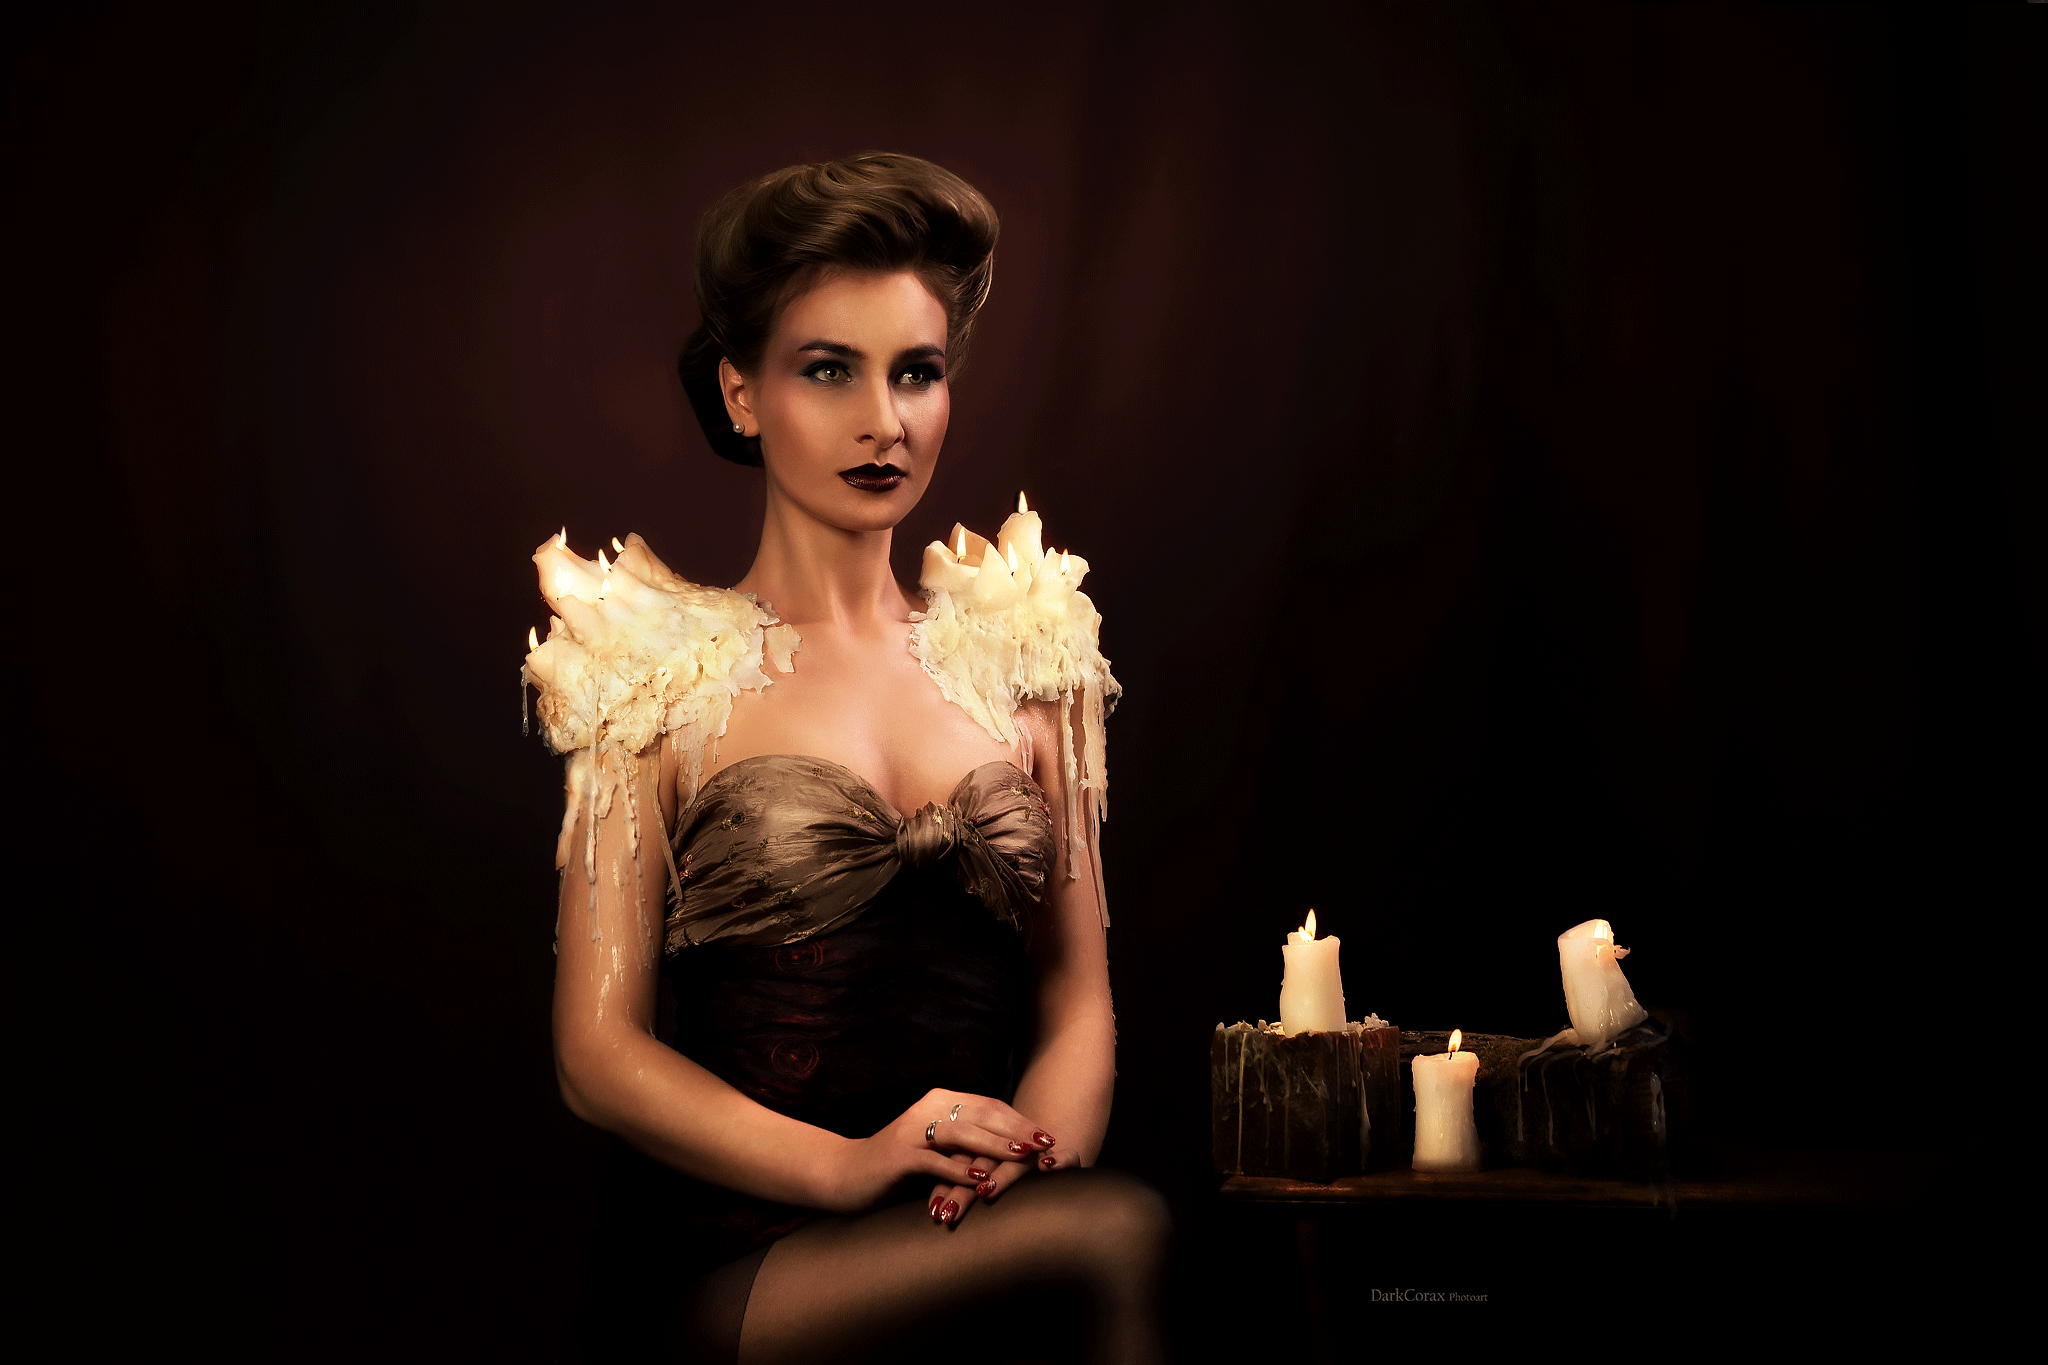 Modern reinterpretation of the Gibson Girl hairstyle, featuring model Anna Povarova with burning wax candles arranged as shoulder pads.